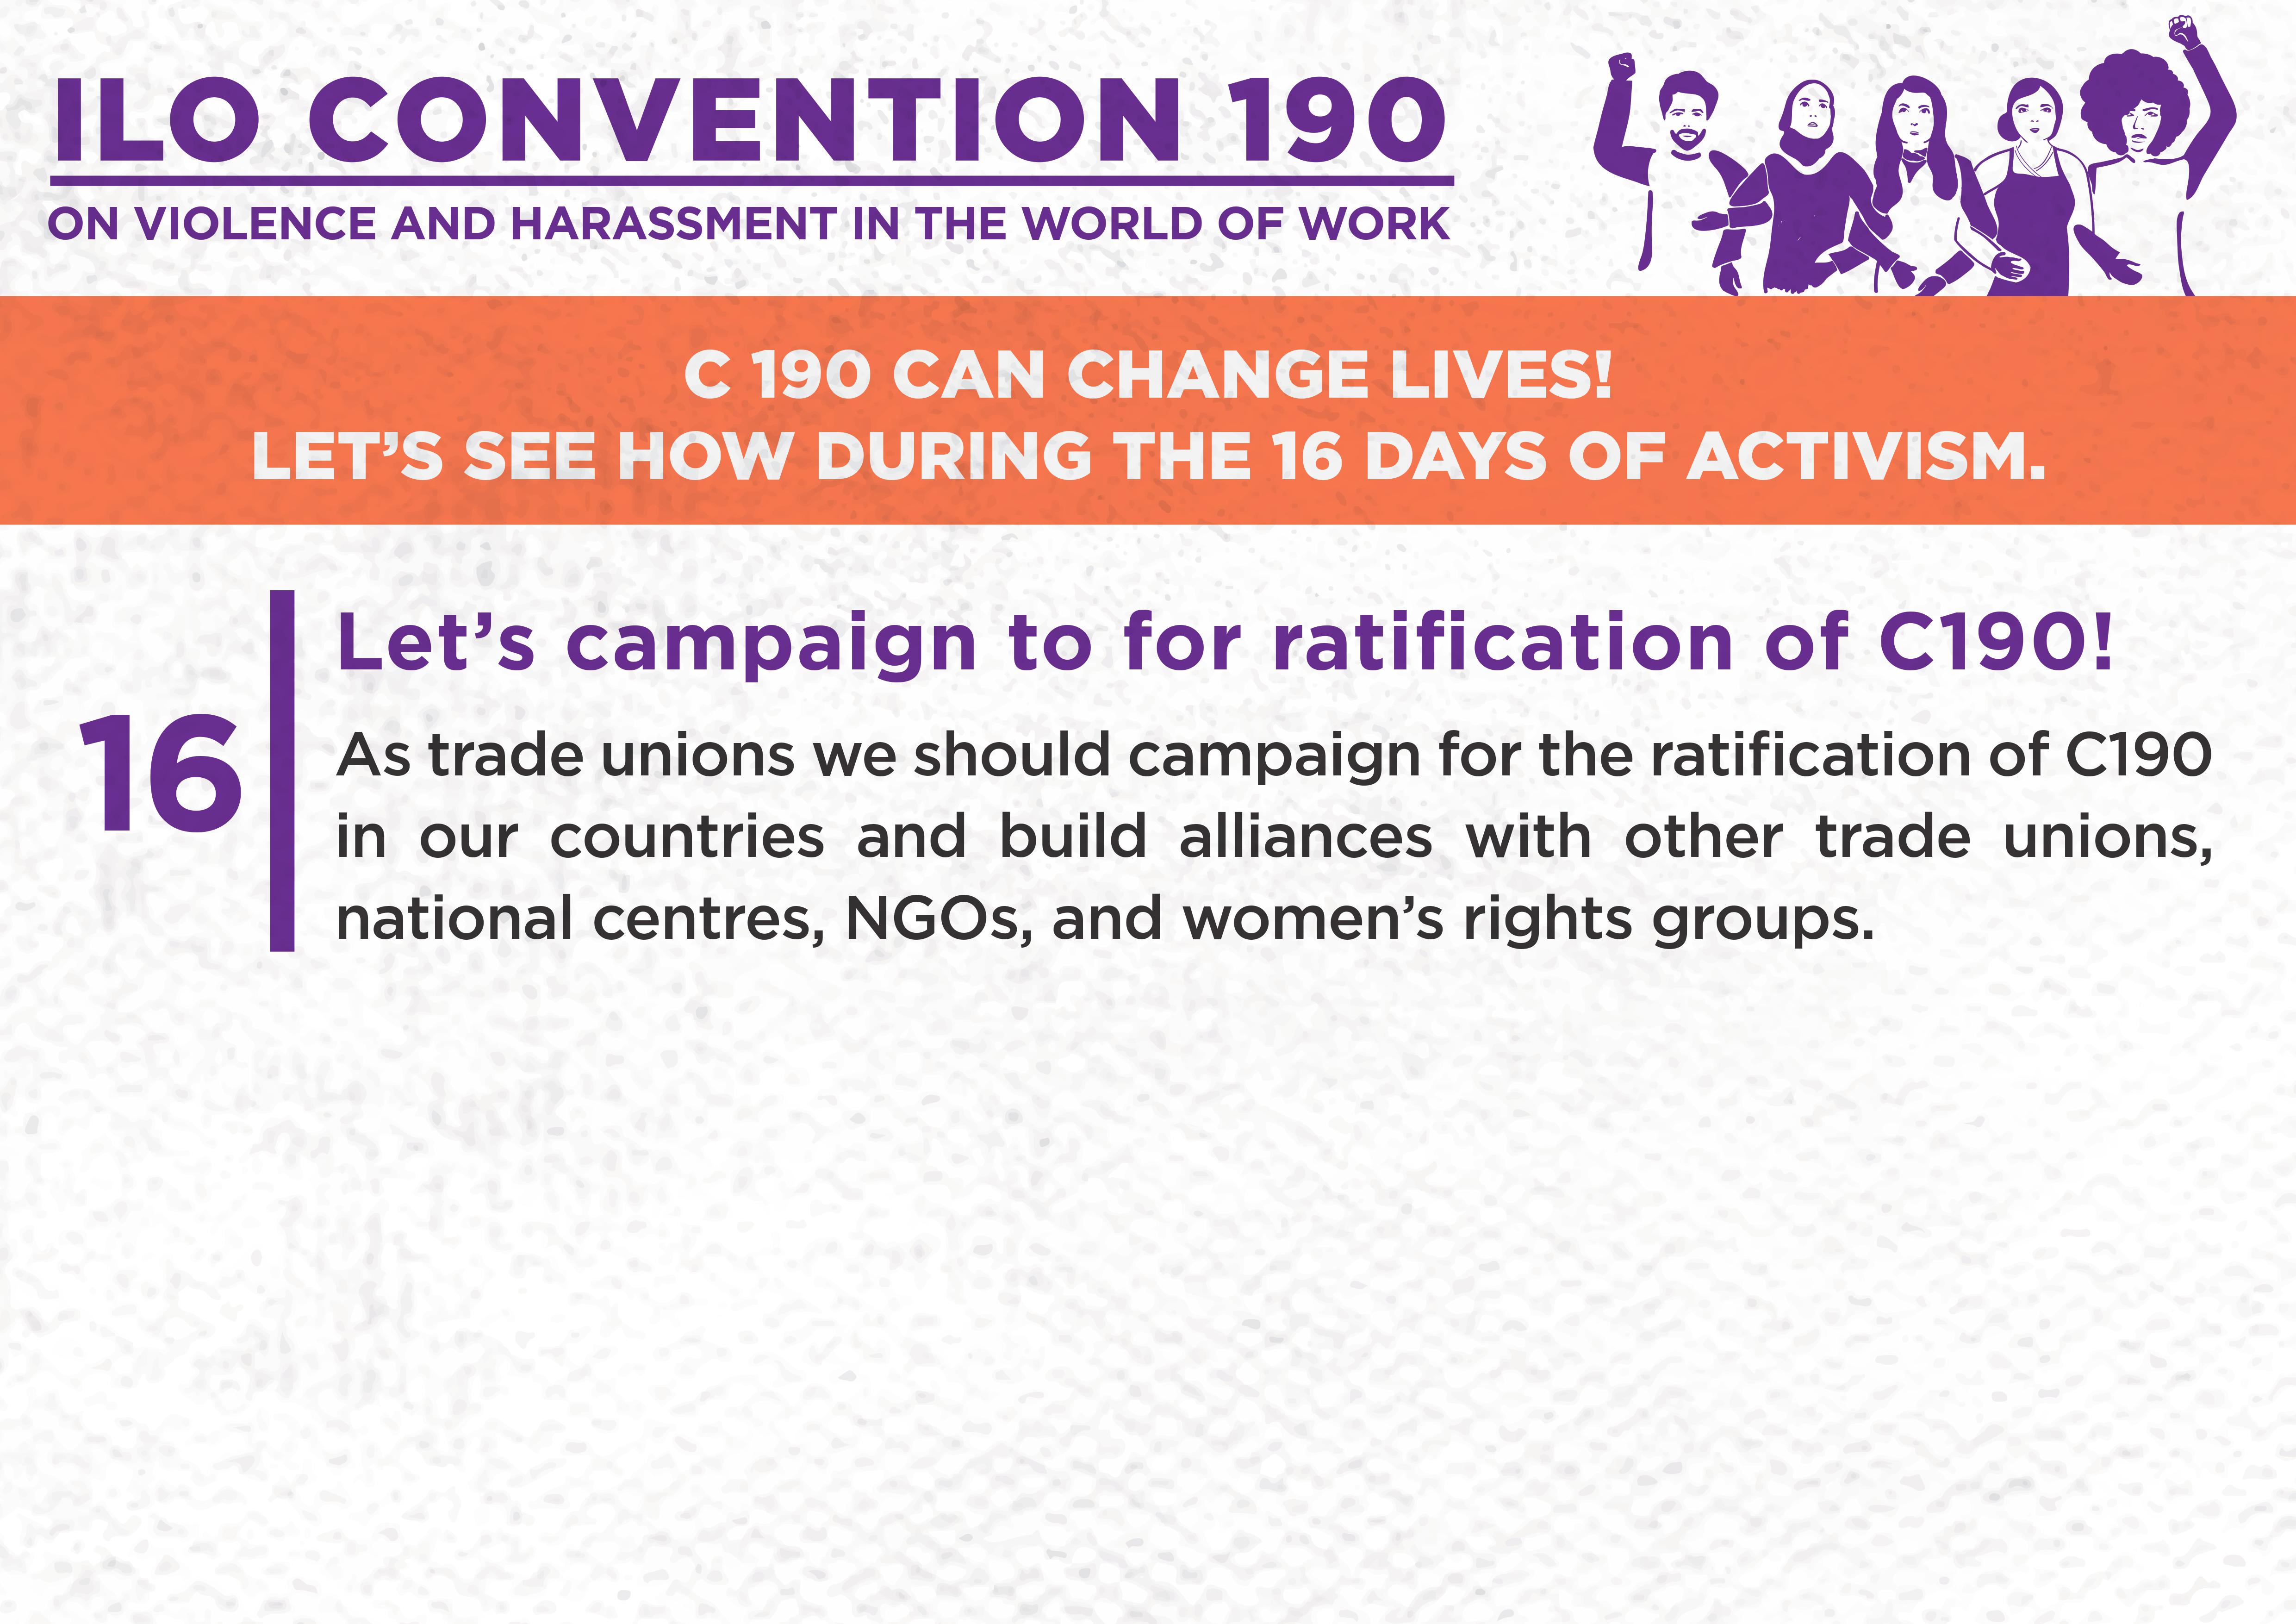 16. Let’s campaign to for ratification of C190!